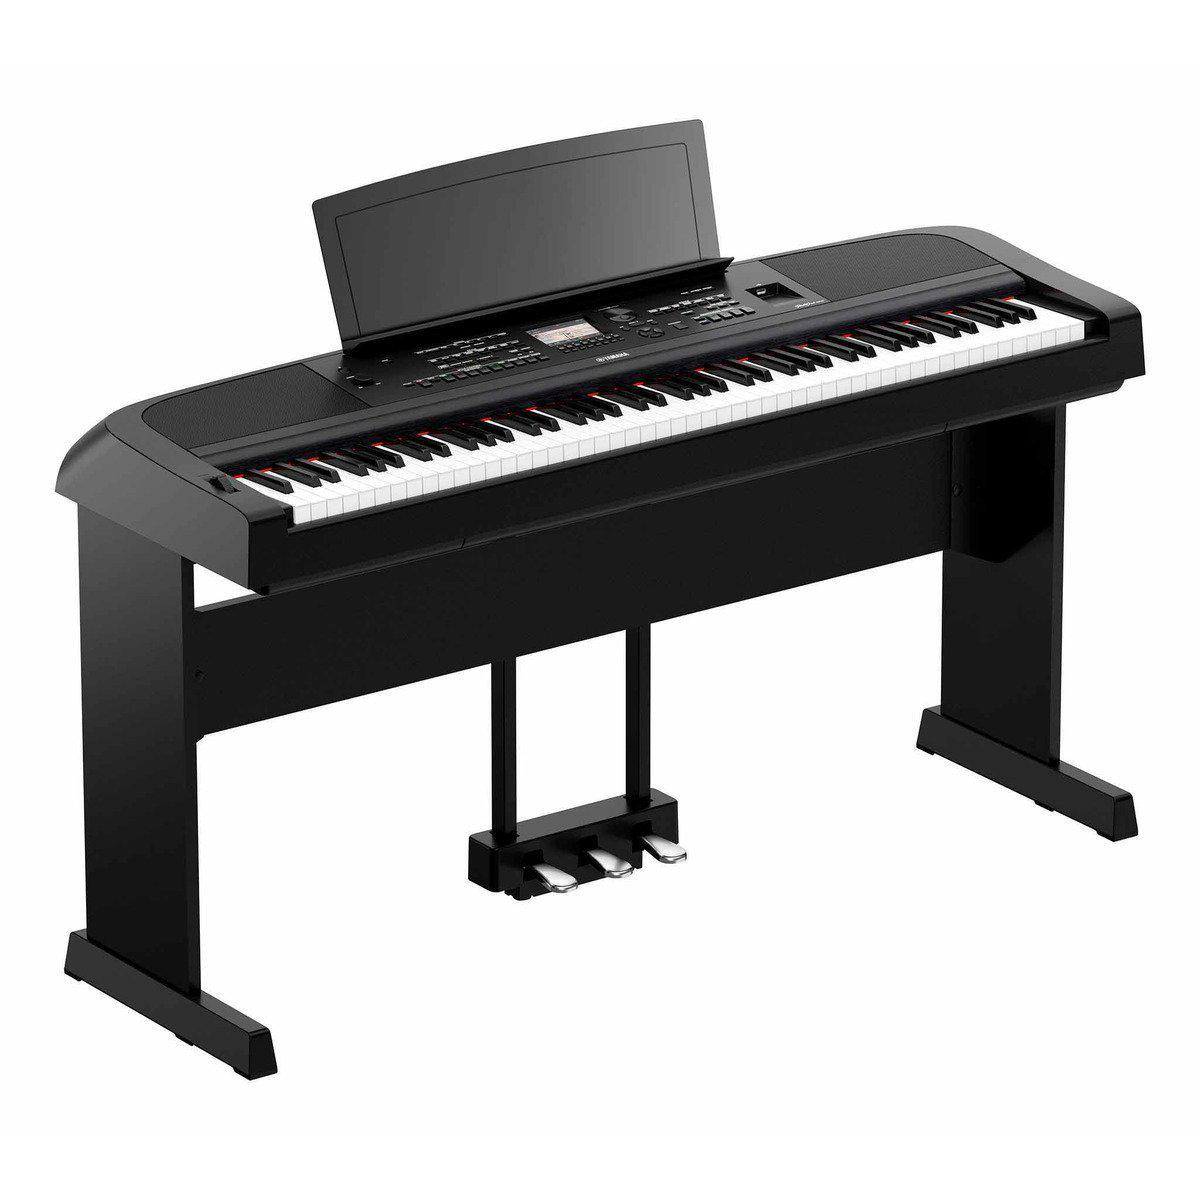 Yamaha DGX-670 Portable Grand Digital Piano-Black-With Stand & Pedals-Andy's Music